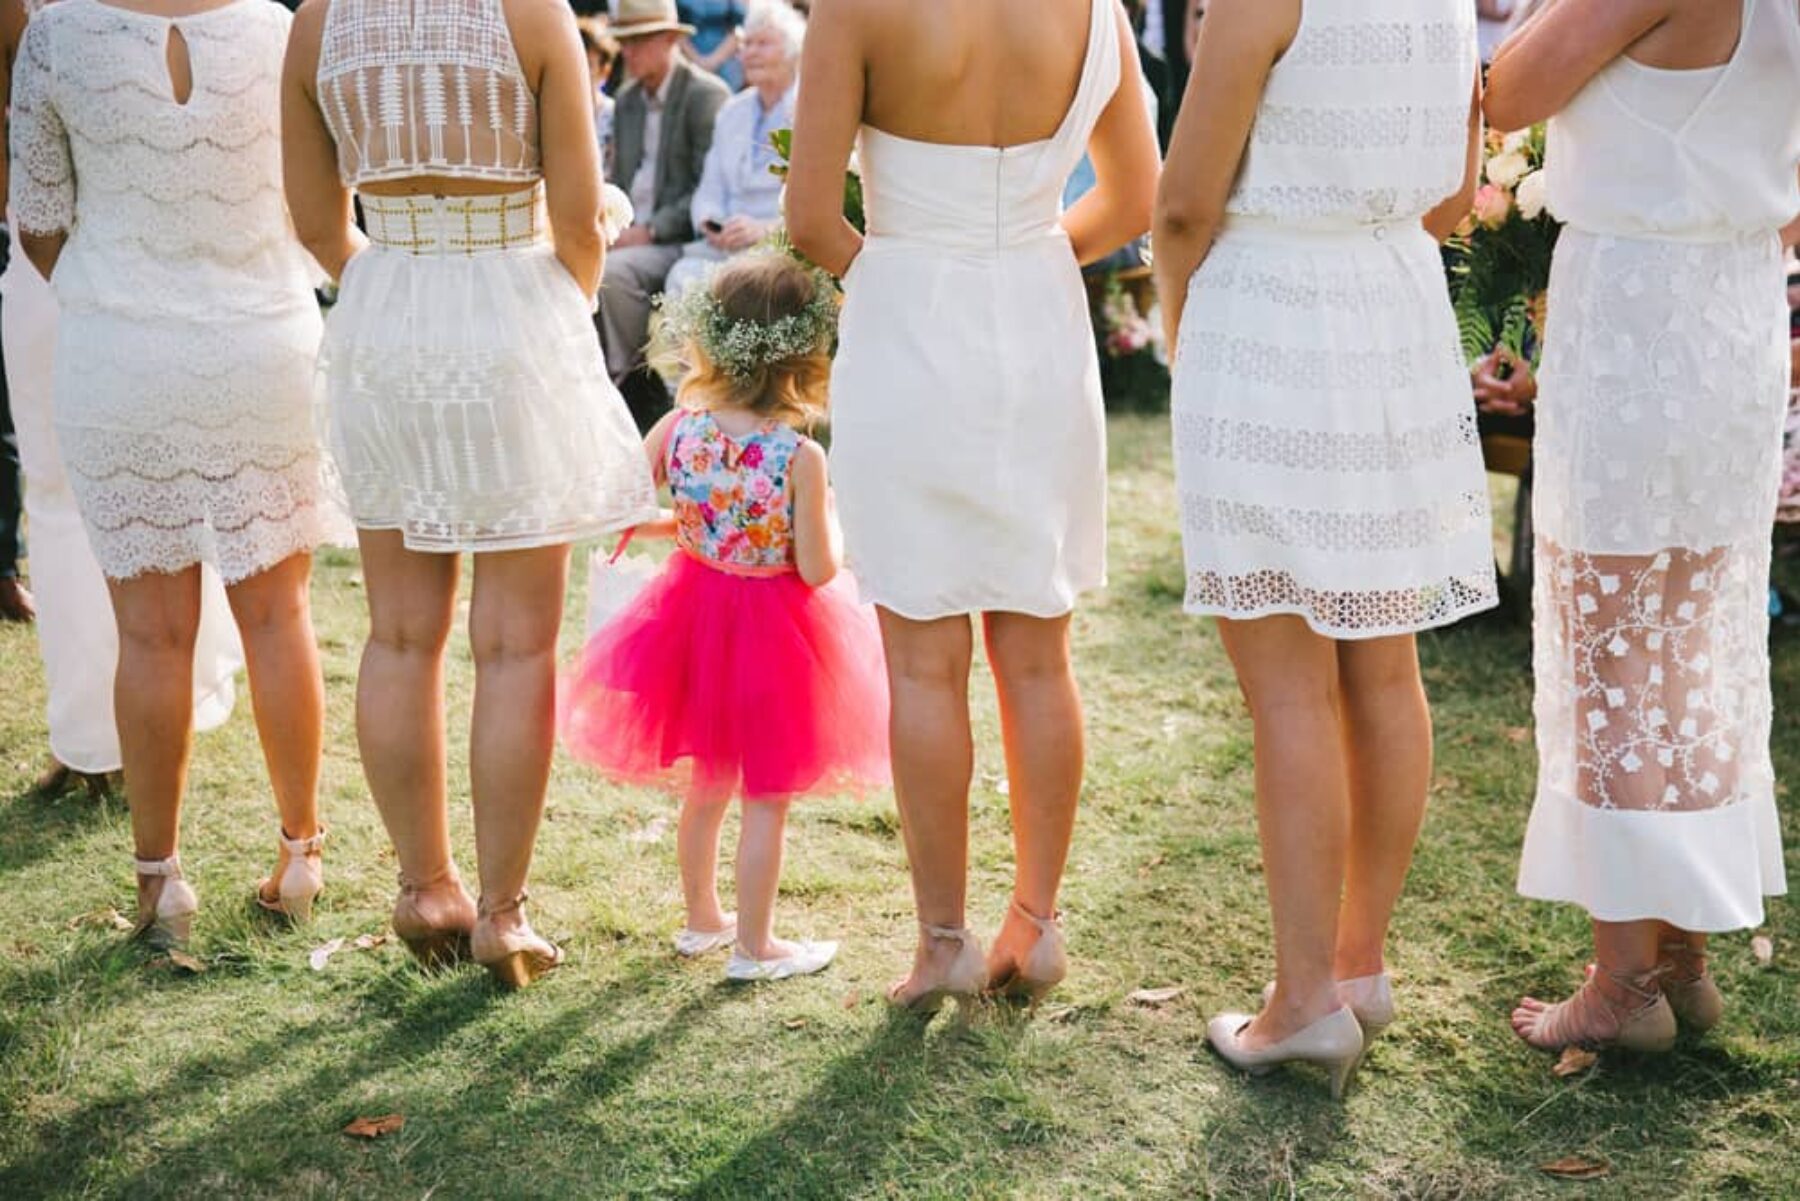 Bridesmaids in different white dresses / Kait Photography